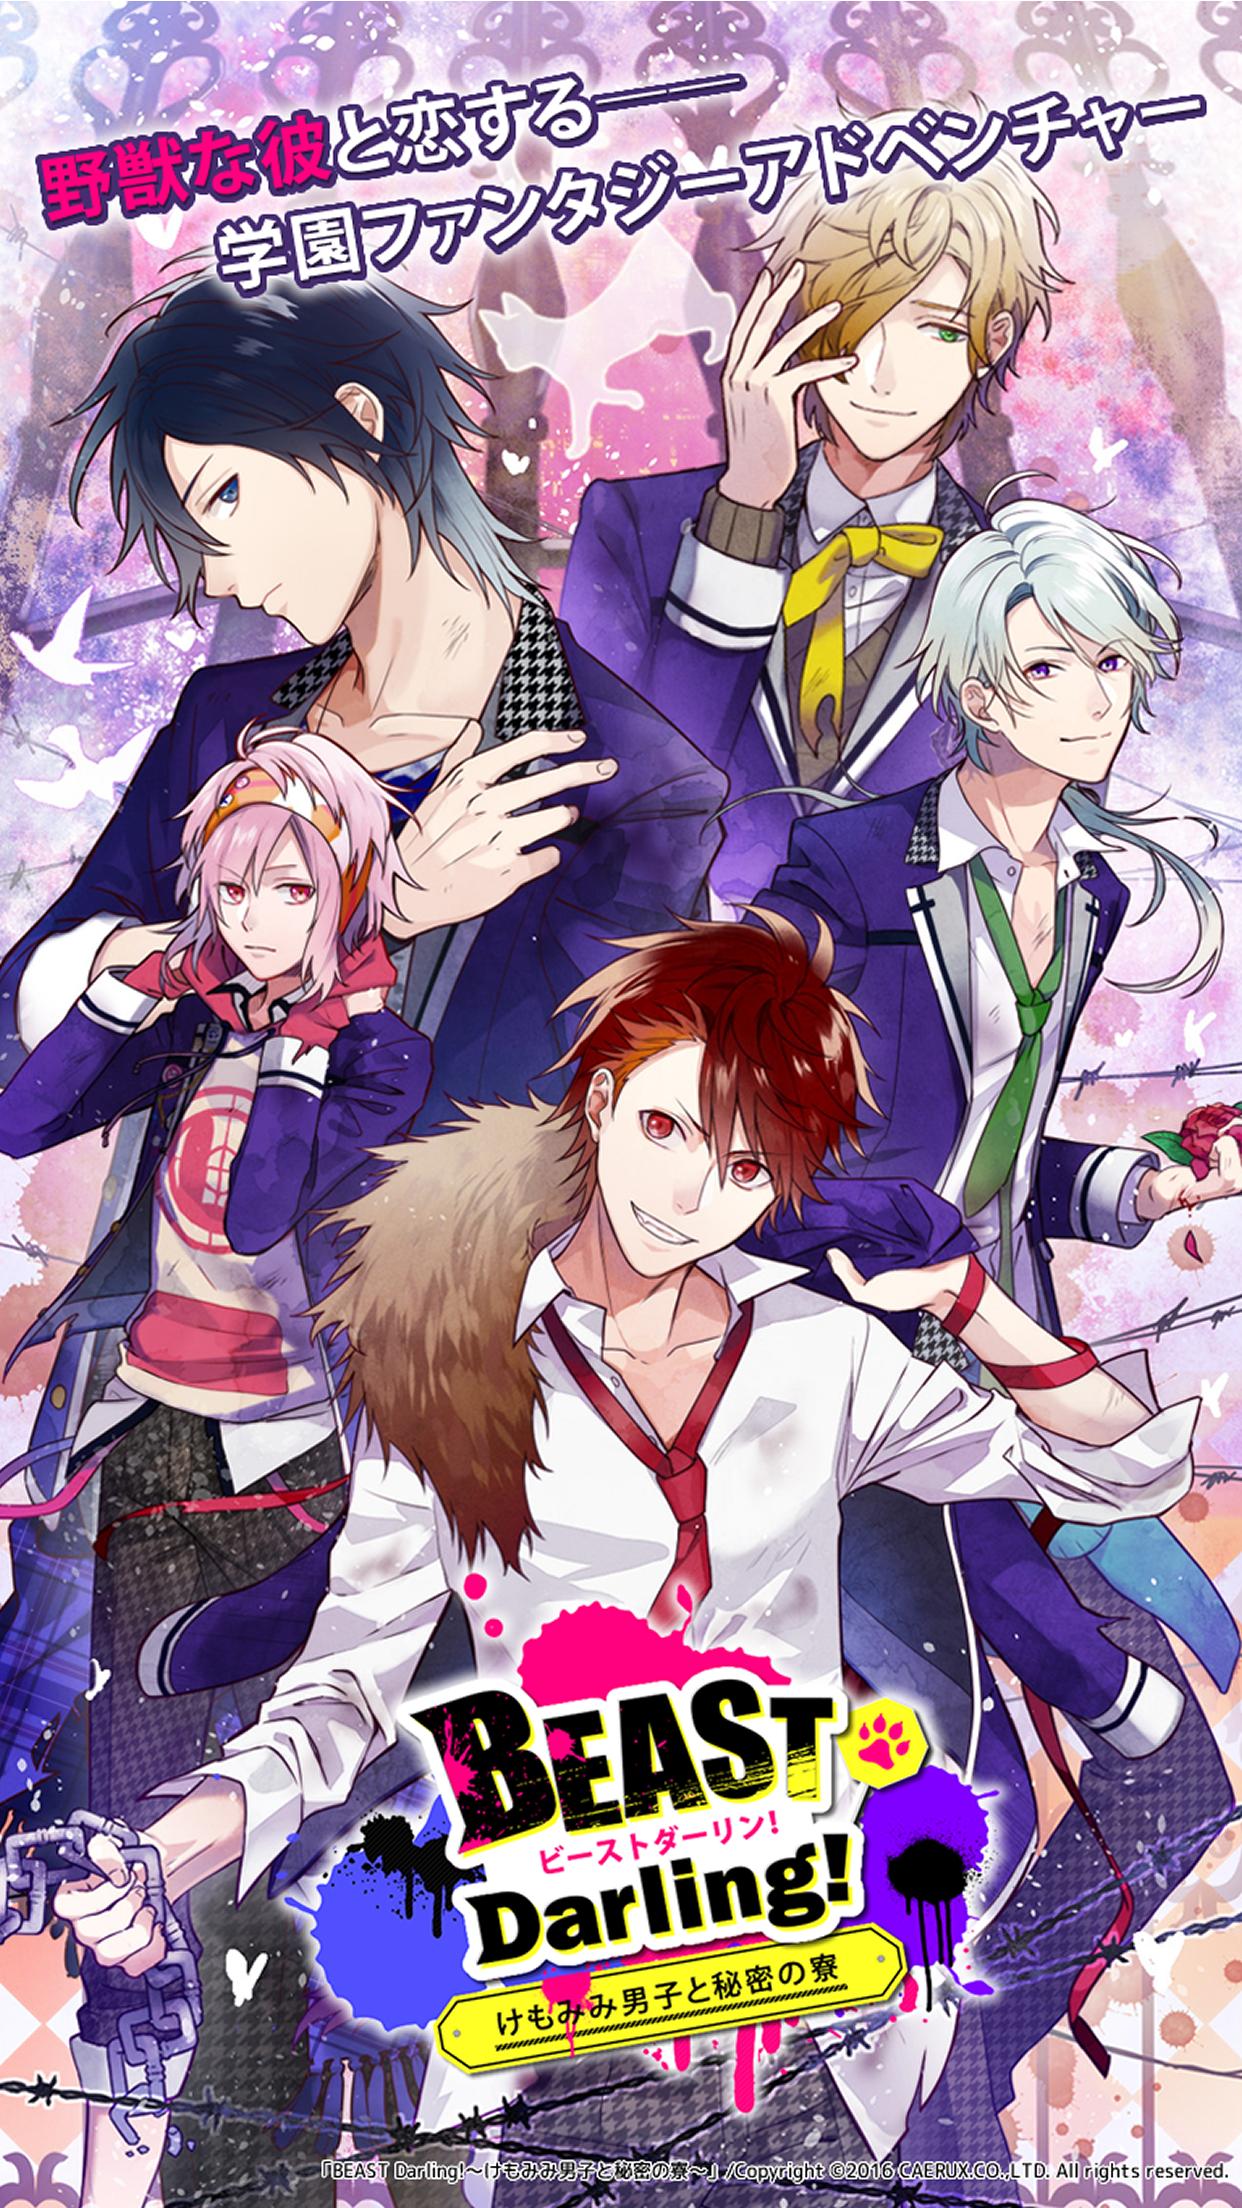 Beast Darling 恋愛ゲーム 乙女ゲーム For Android Apk Download